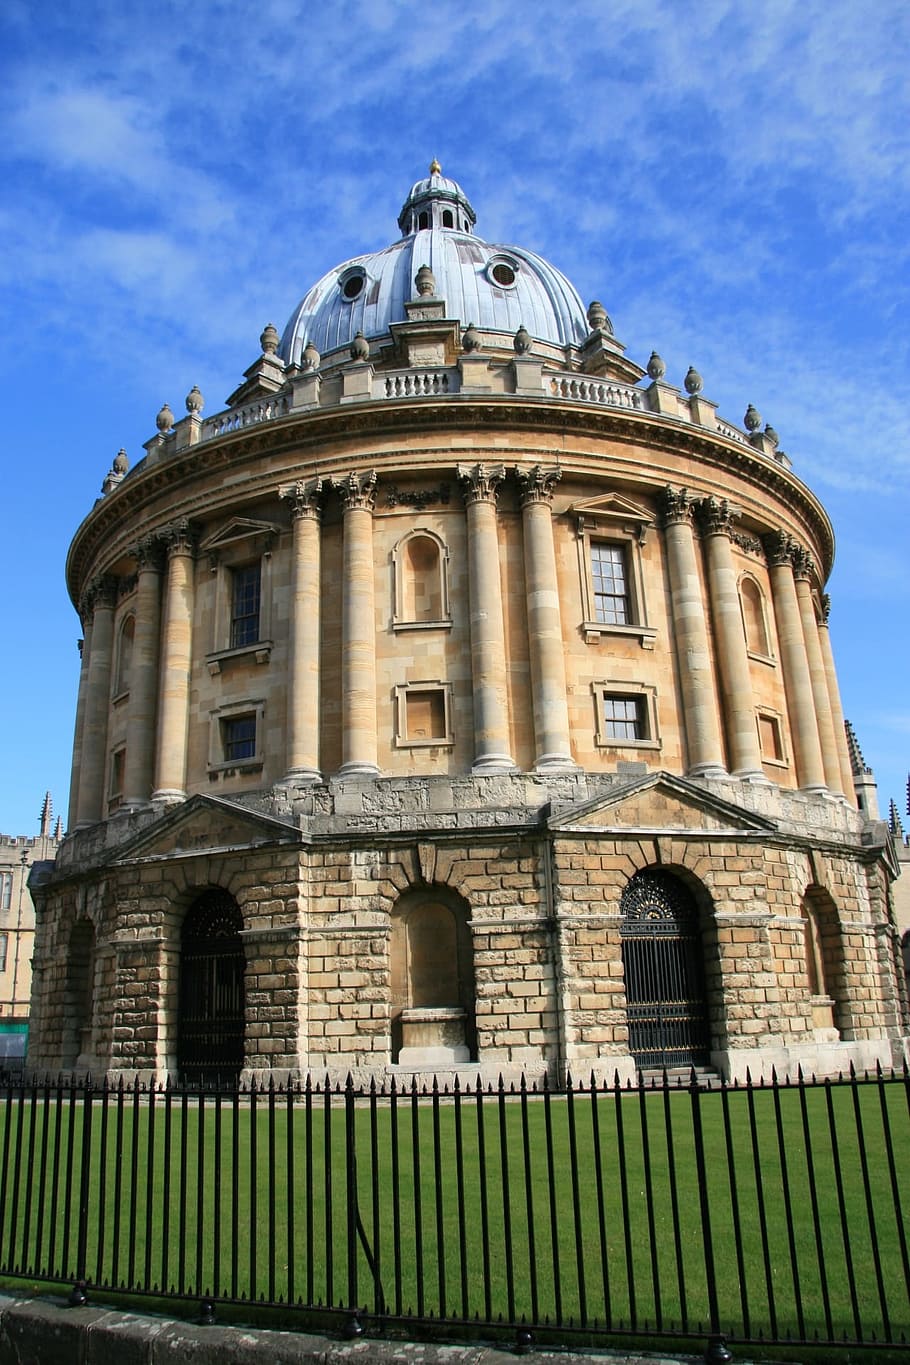 Oxford, England, Library, Uk, oxford, england, architecture, oxfordshire, europe, university, college